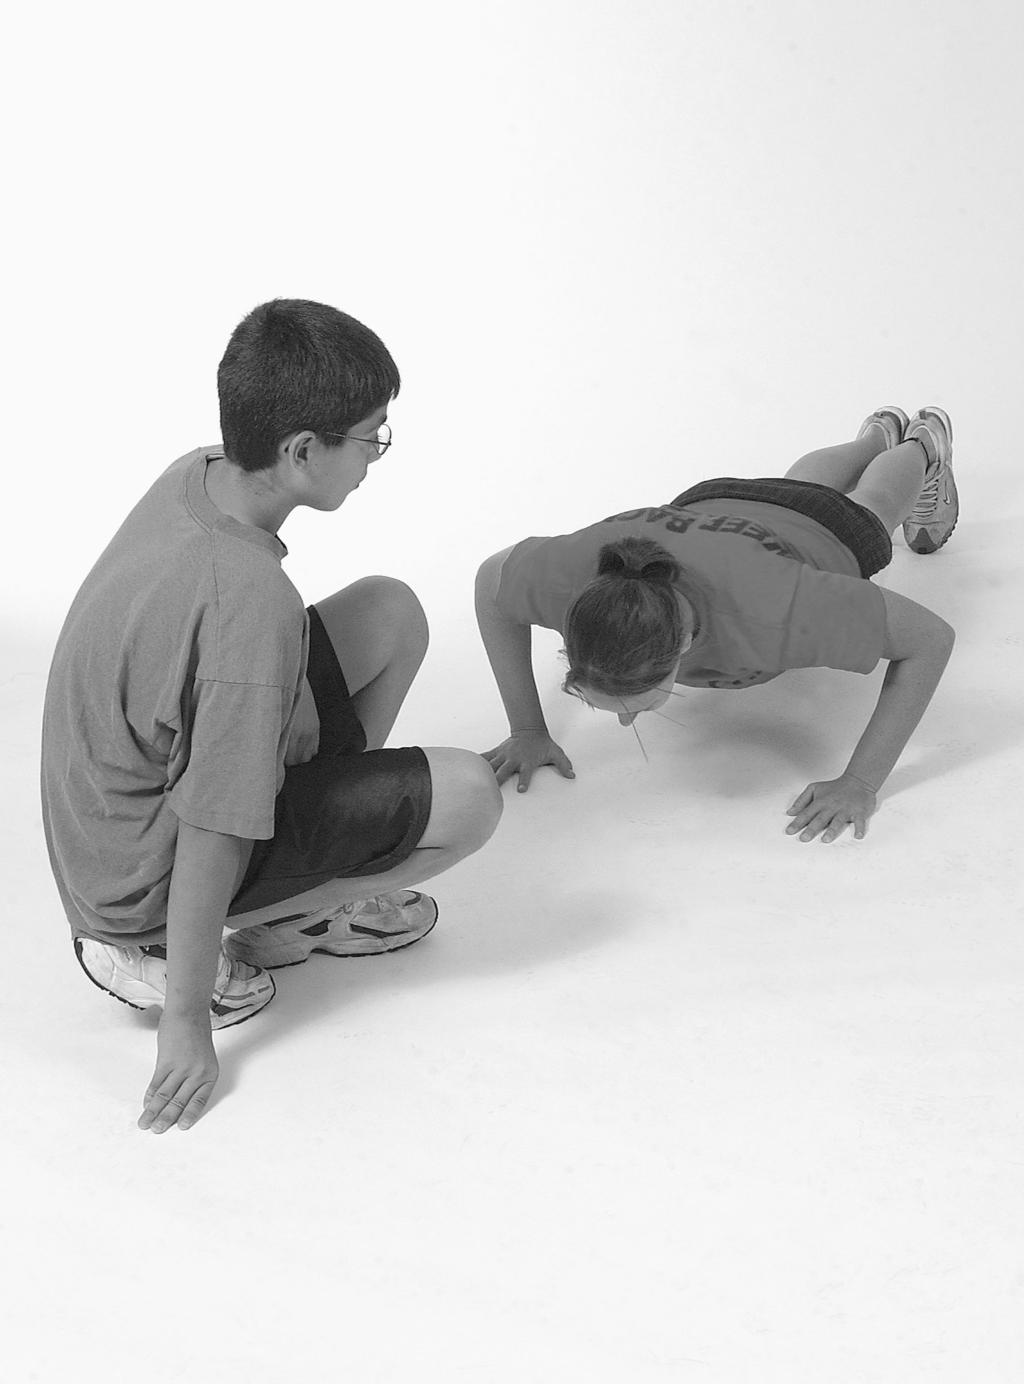 FITNESSGRAM/ACTIVITYGRAM Test Administration Manual 90 Push-Up Test Objective To complete as many 90 push-ups as possible at a rhythmic pace. This test item is used for males and females.